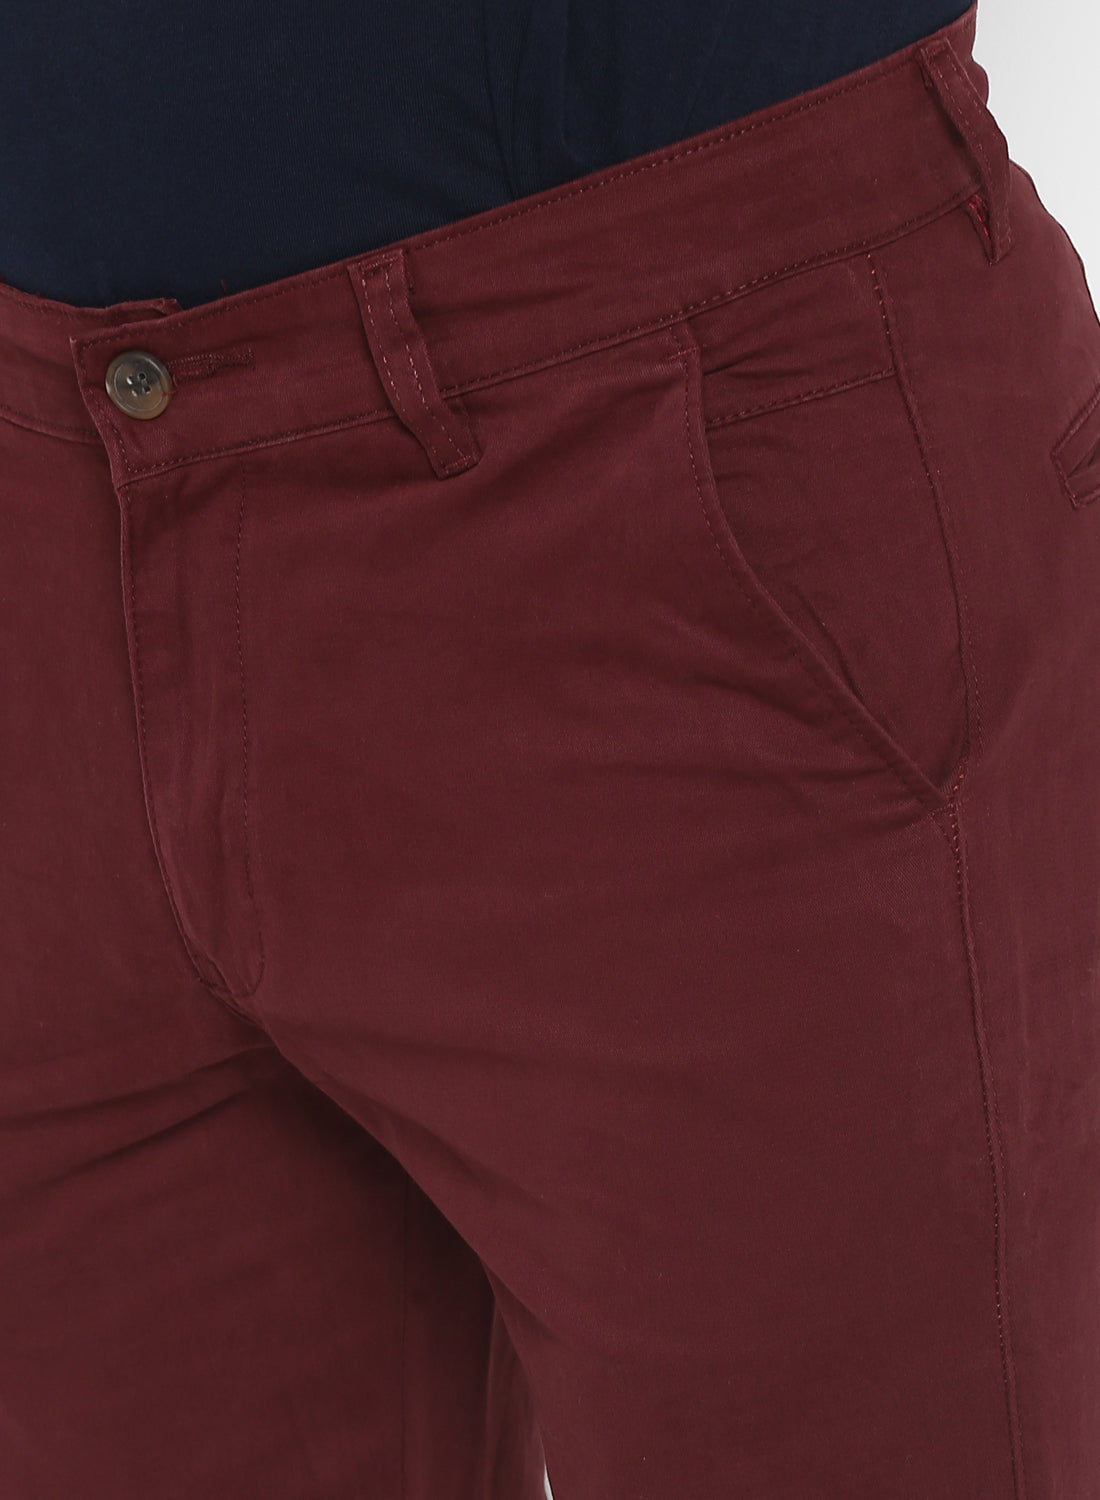 Urbano Fashion Men's Maroon Cotton Slim Fit Casual Chinos Trousers Stretch